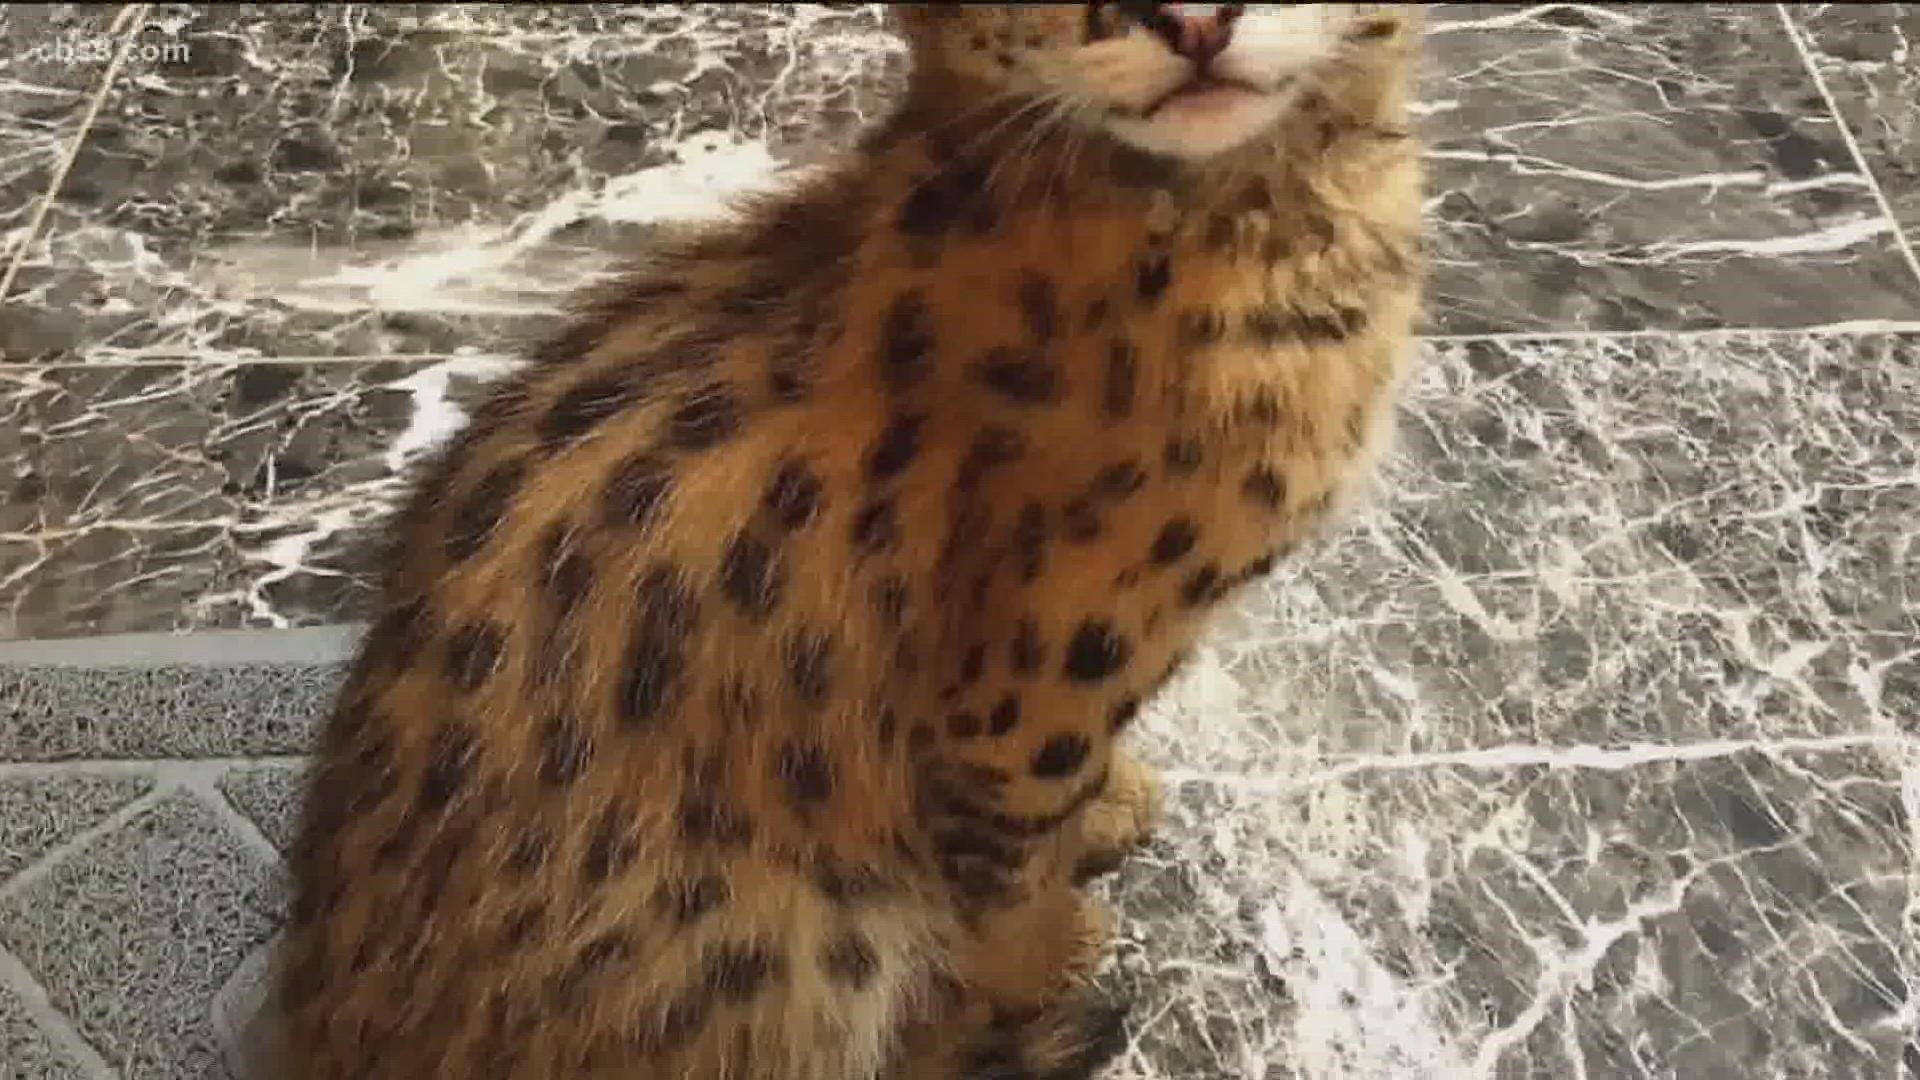 The elusive serval was spotted in a Rancho Penasquitos but had moved along by the time the owners arrived, he was already gone.